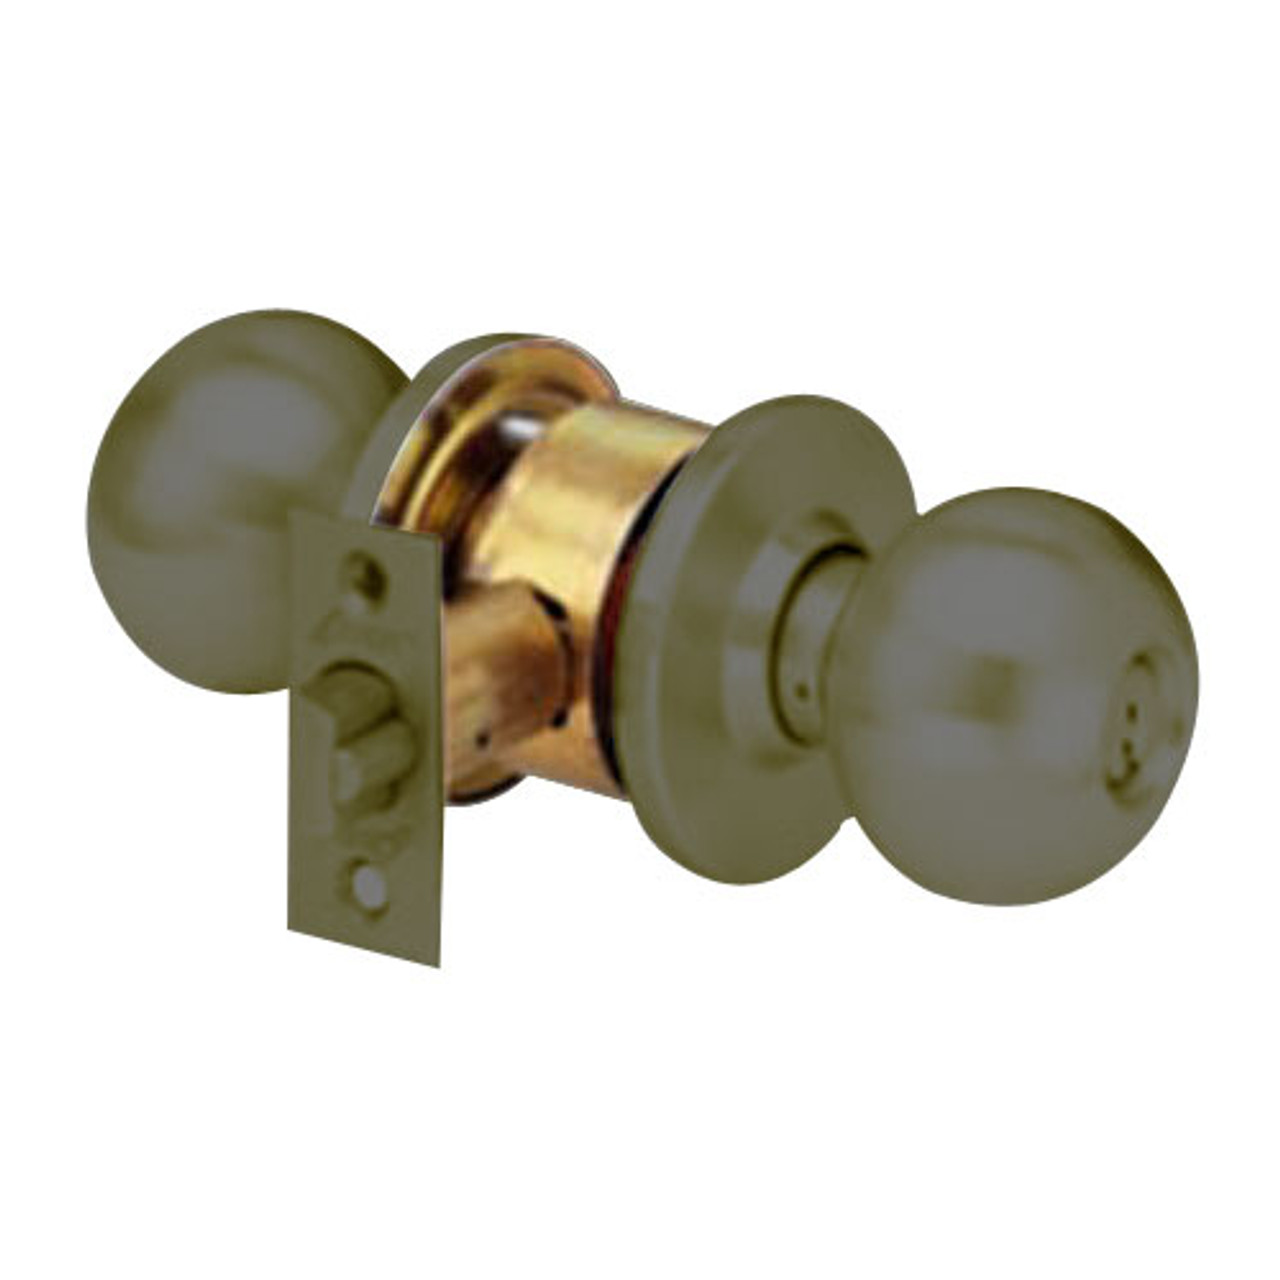 MK17-TA-10B Arrow Lock MK Series Cylindrical Locksets Single Cylinder for Classroom with TA Knob in Oil Rubbed Bronze Finish